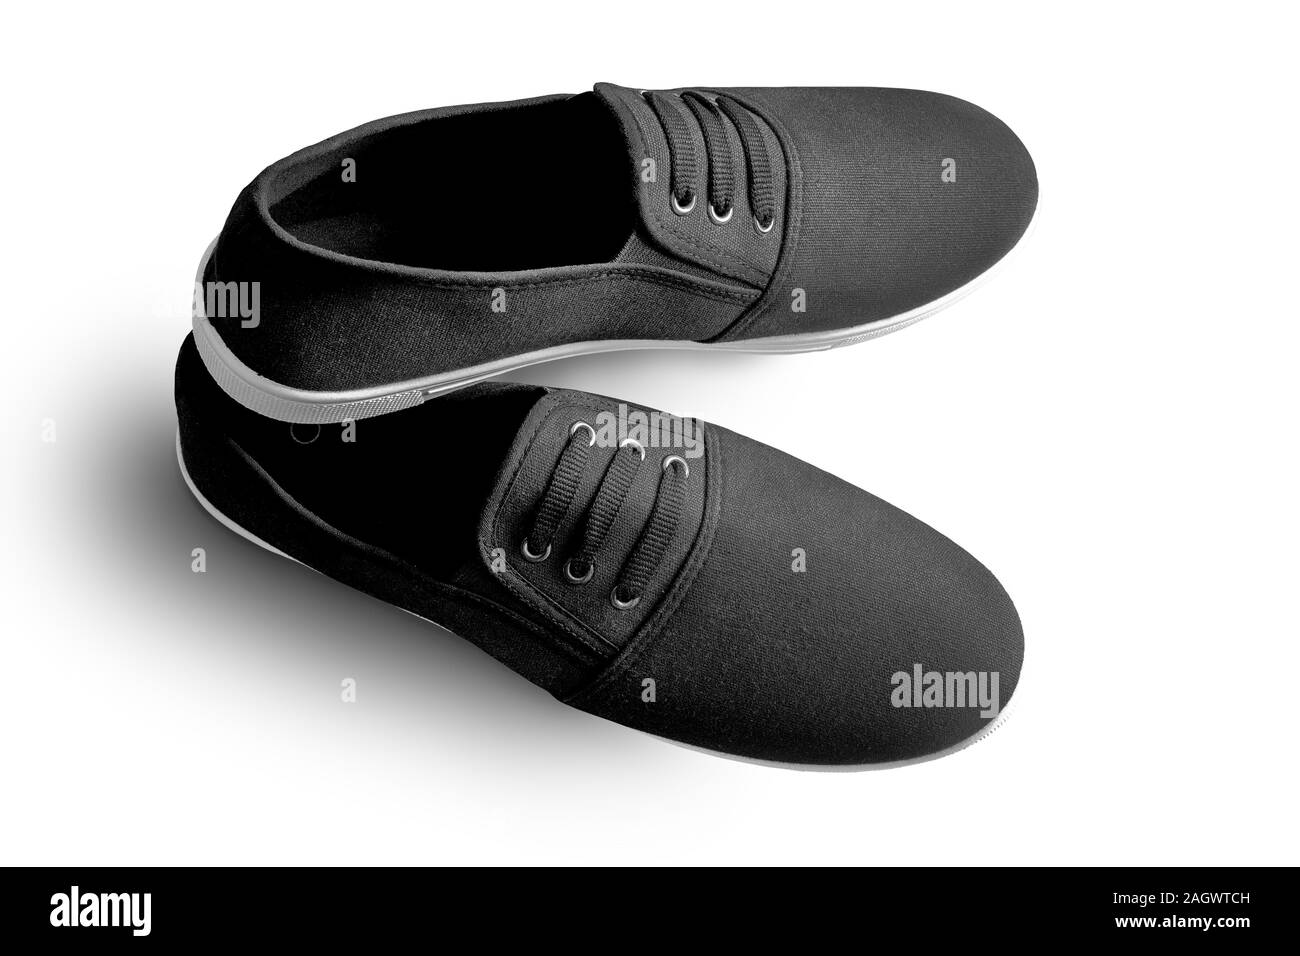 Summer sports shoes with a black cloth top. Stock Photo